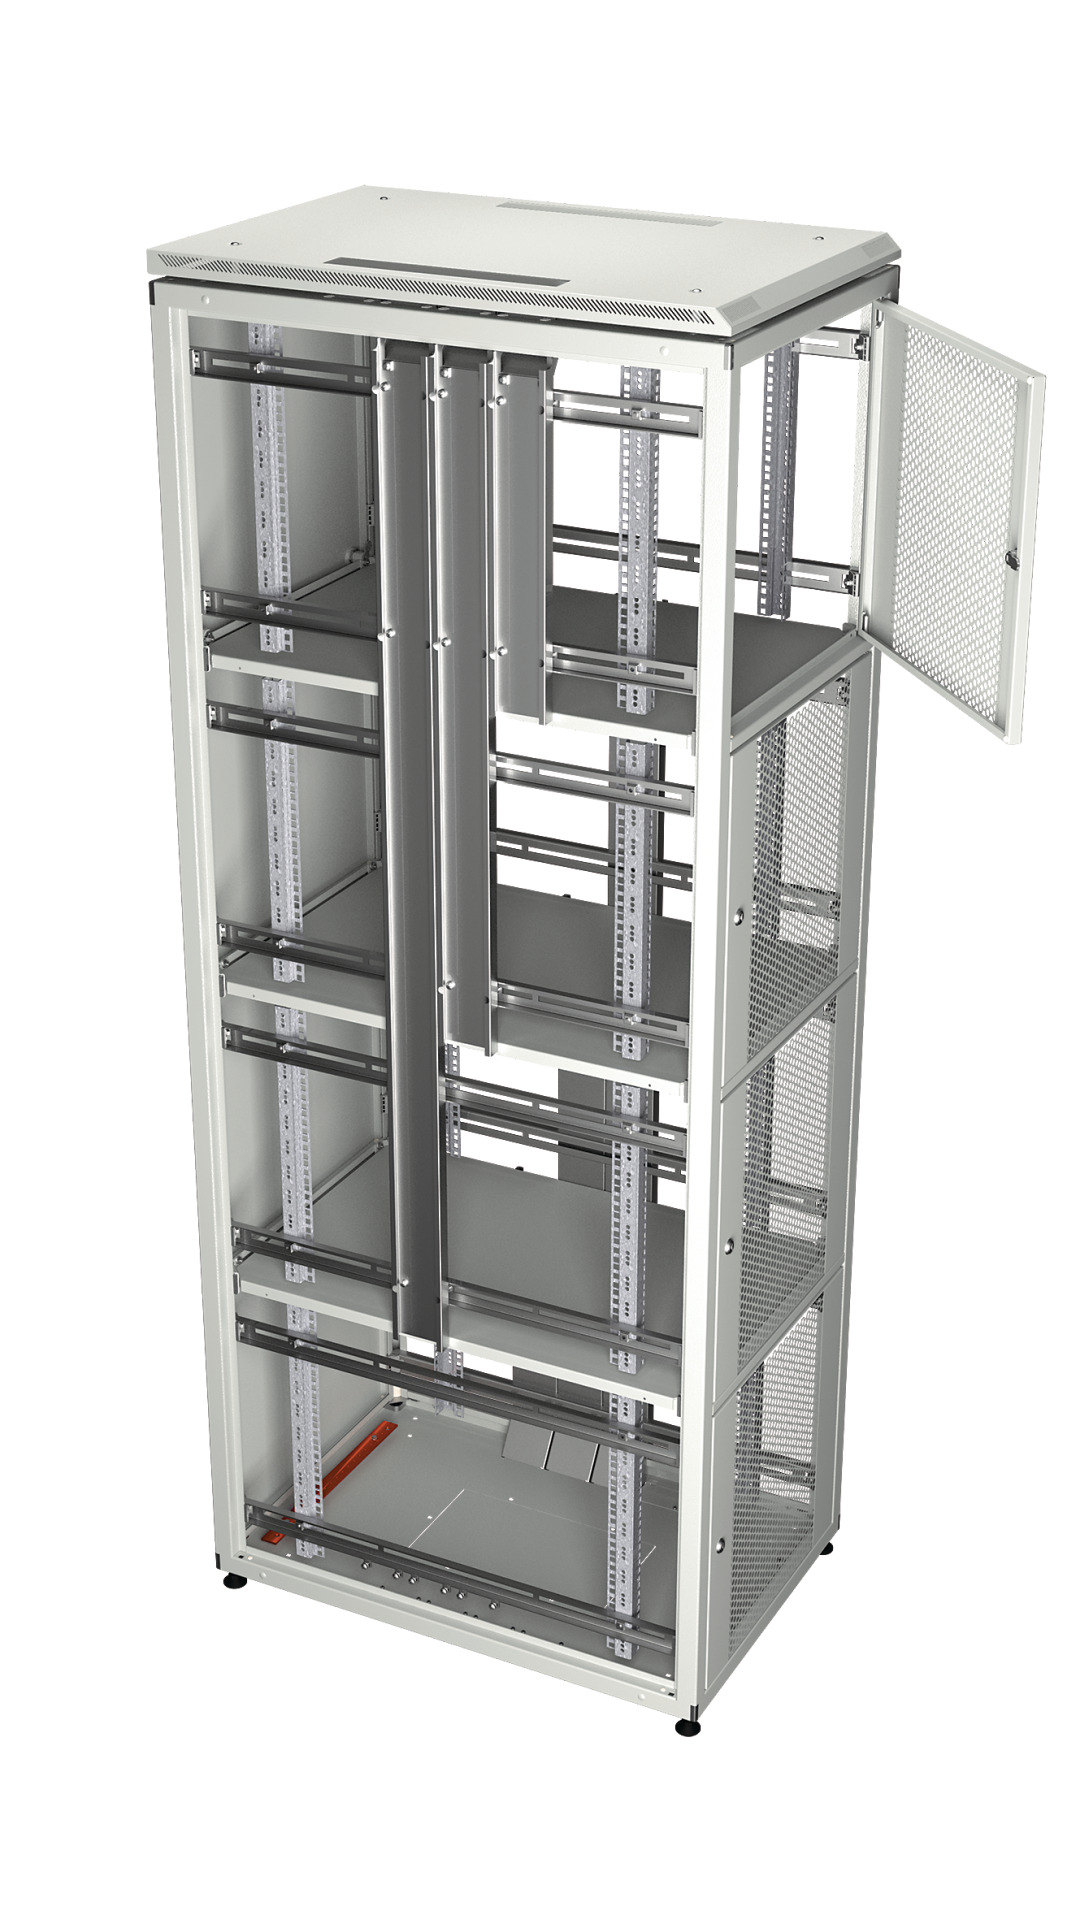 Co-Location Rack PRO, 4 x 9U, 600x1200 mm, F+R 1-Part Perforated, RAL9005